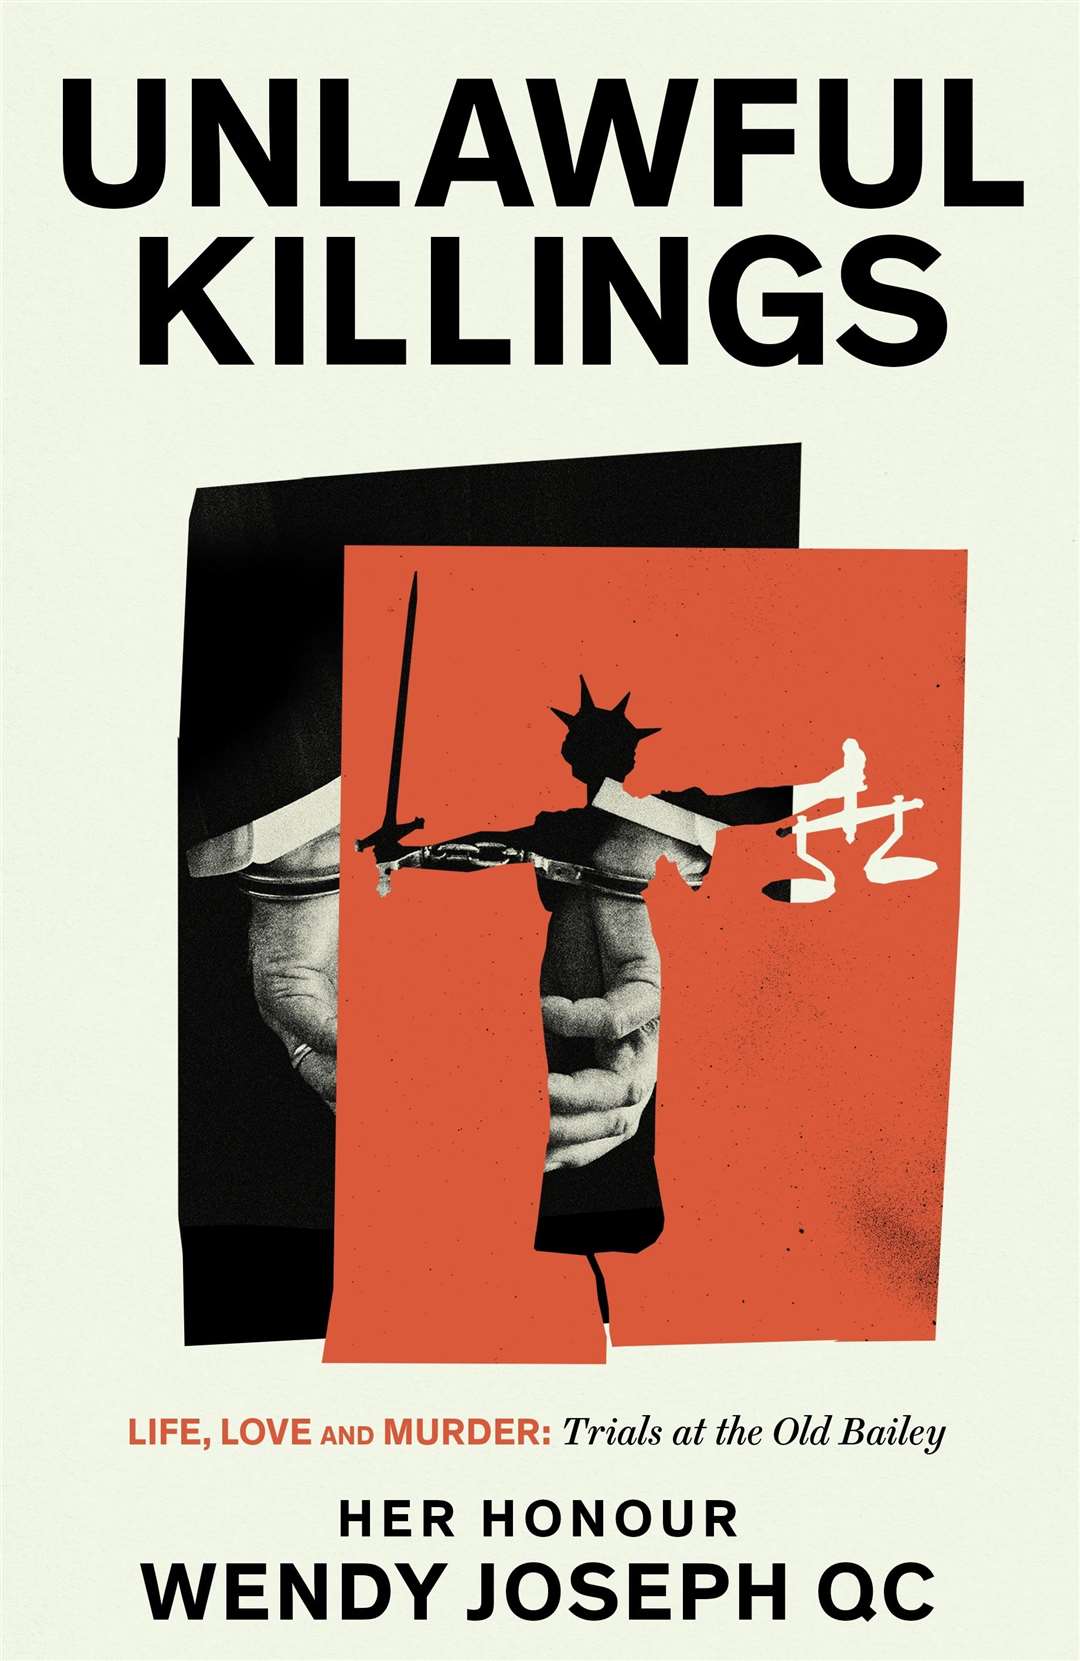 The front cover of Unlawful Killings (Penguin Random House UK/PA)